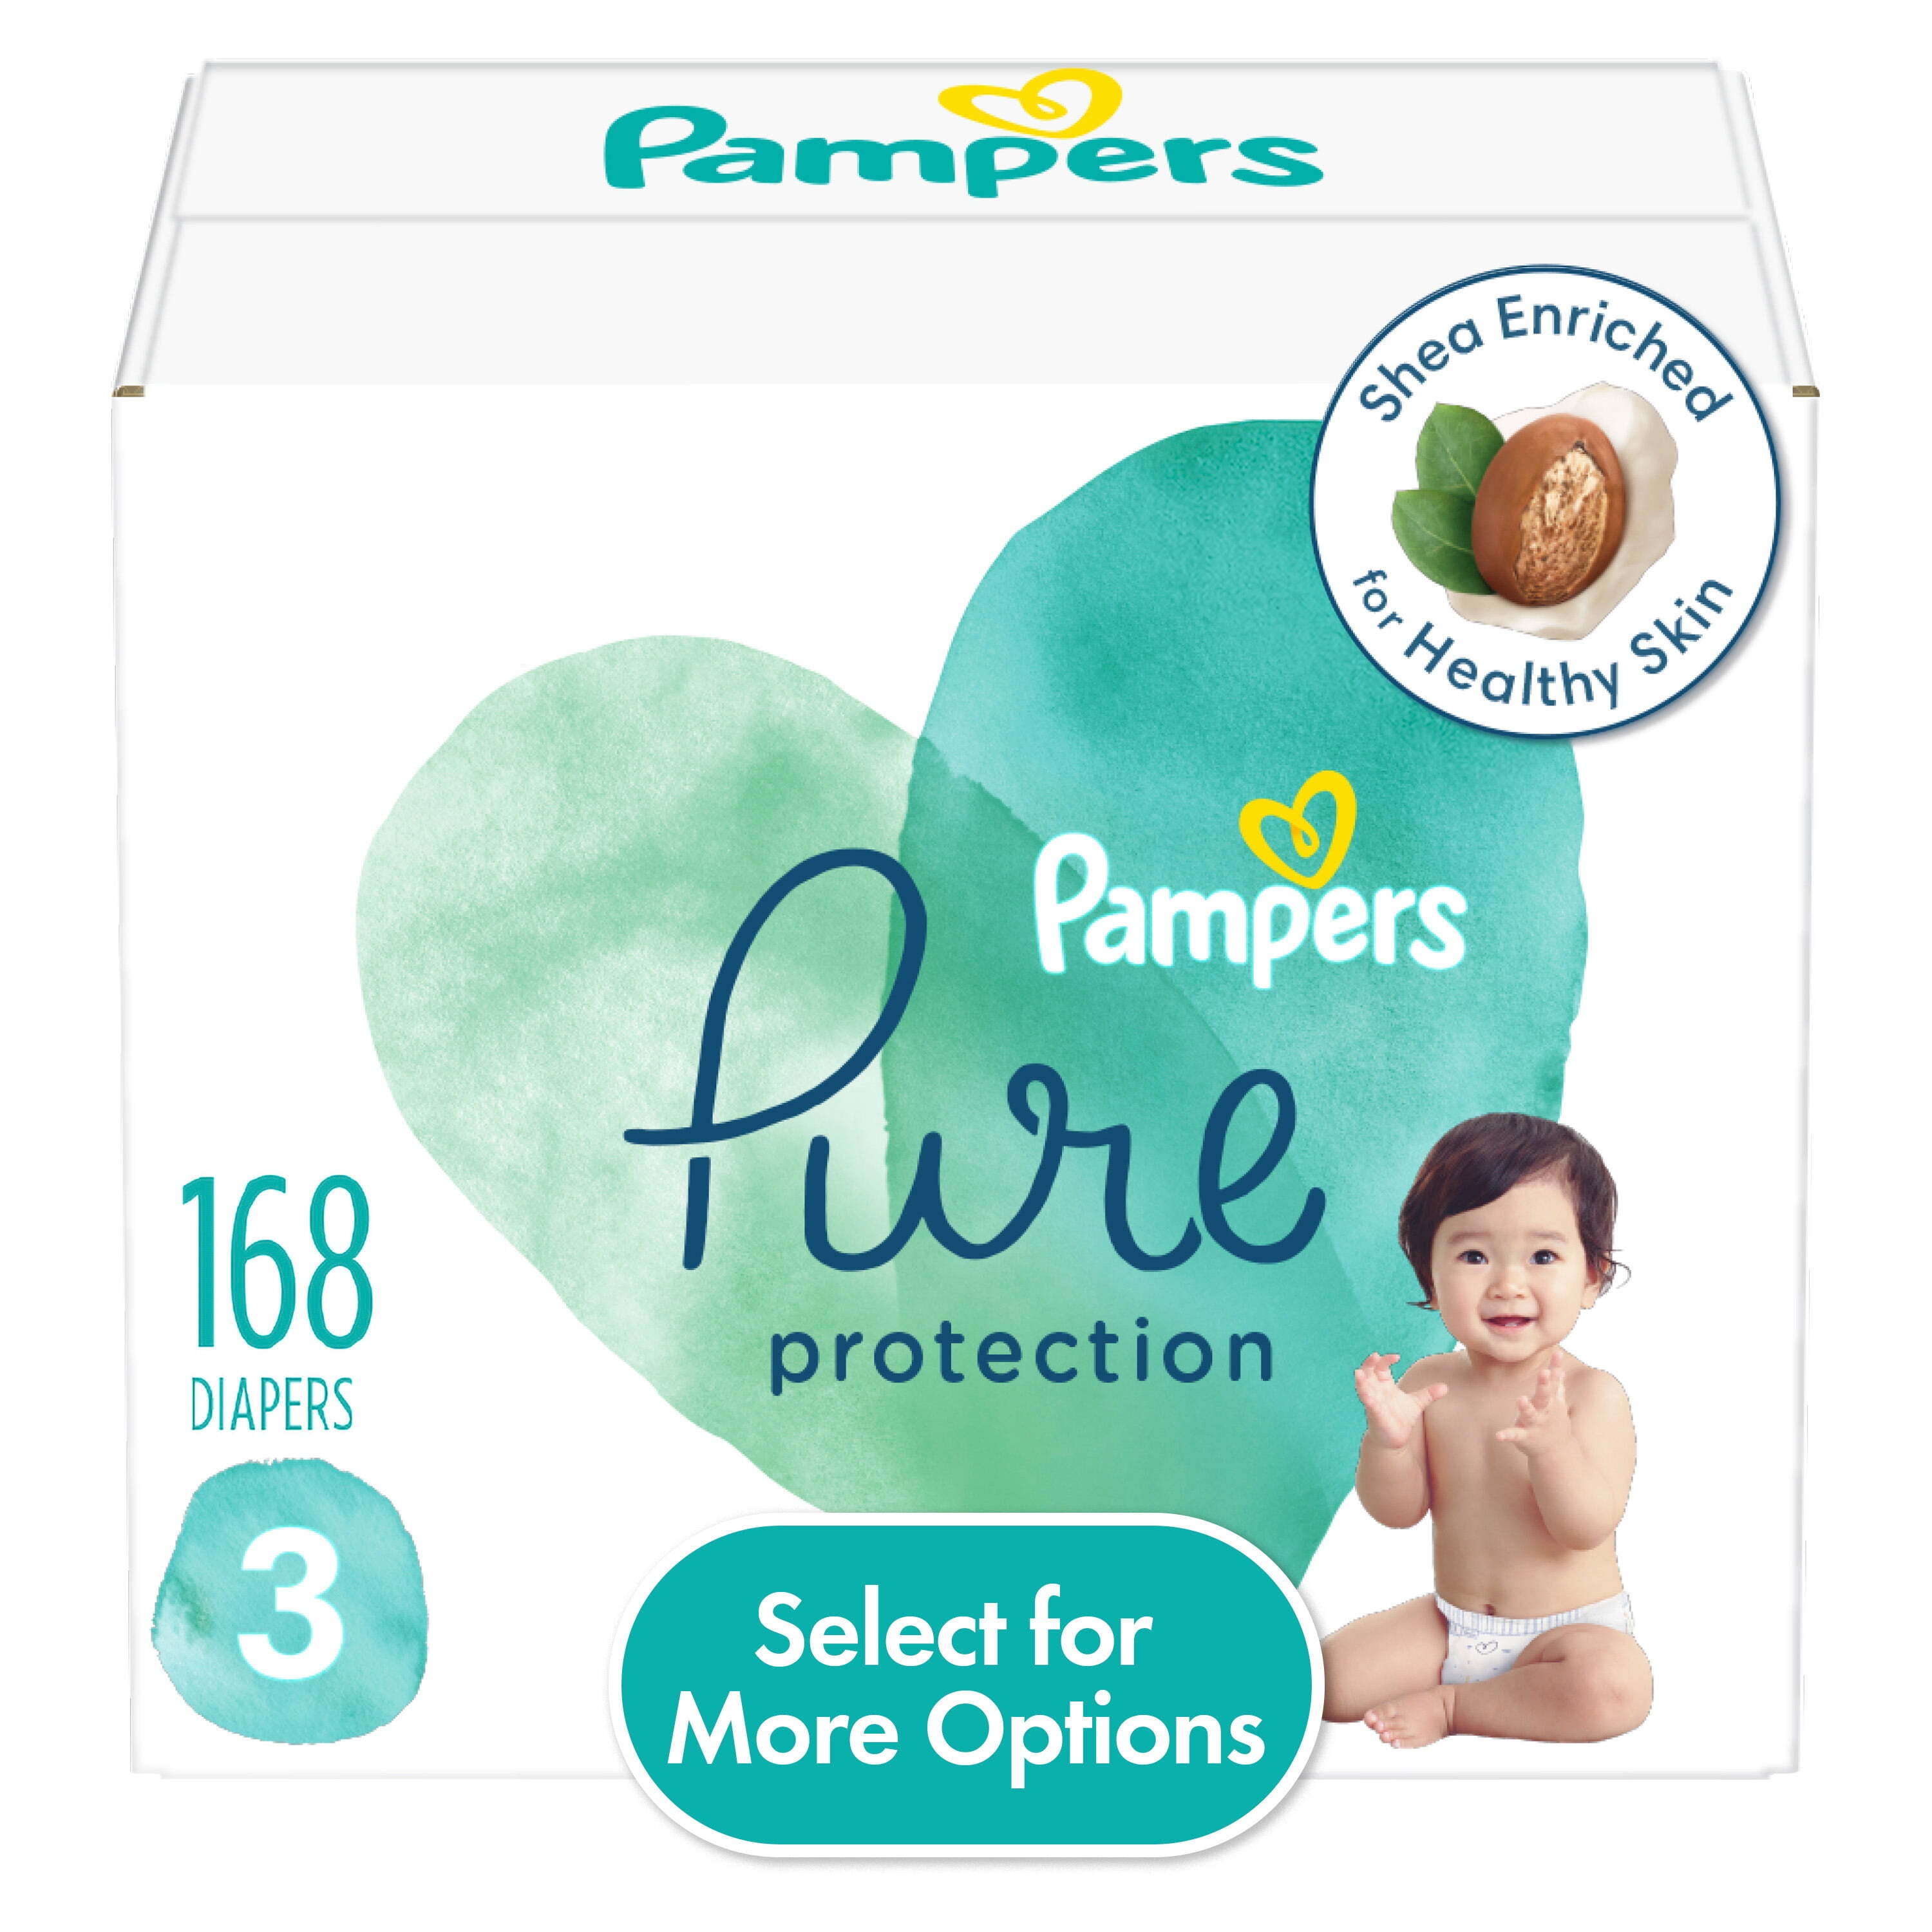 Pampers, Harmonie, Langes, Pure, Protecten, Taille 3, 22pcs, 22 pc